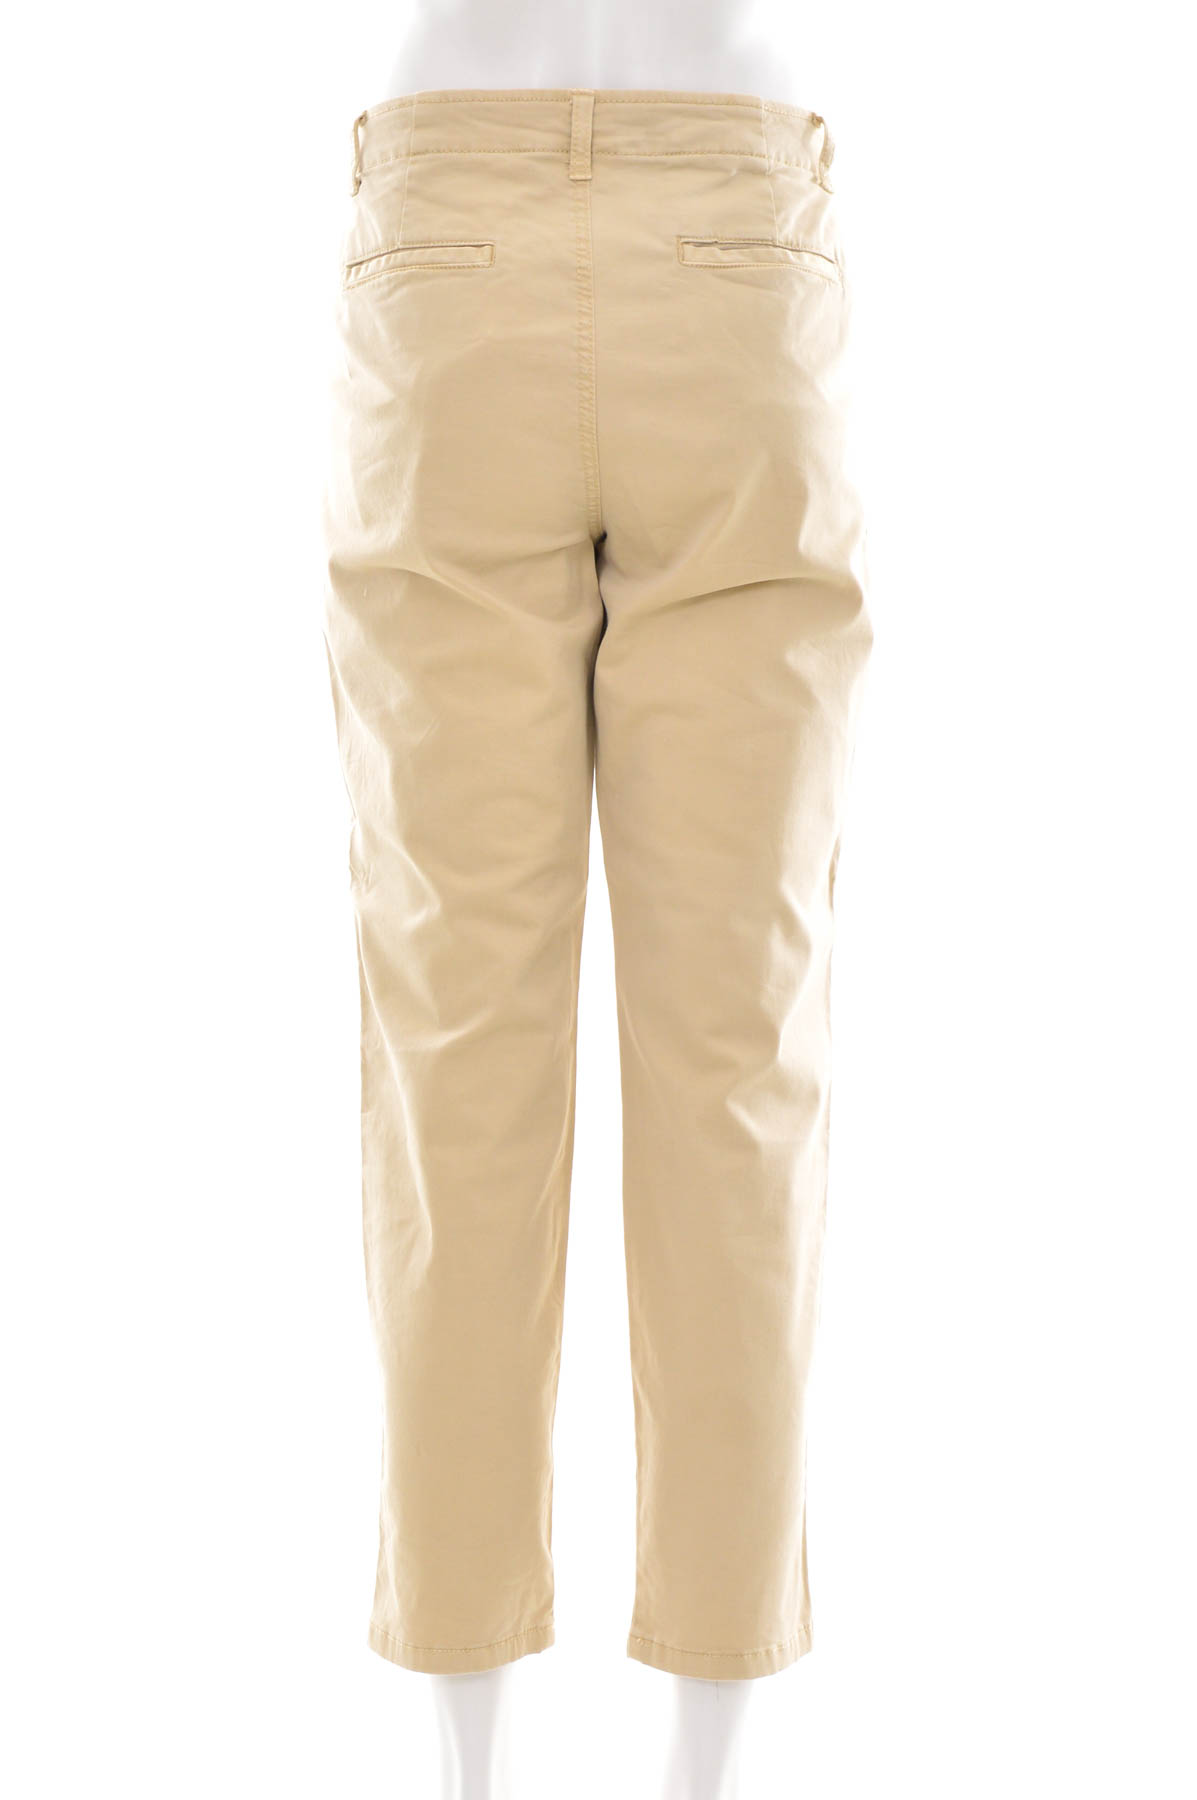 Men's trousers - Yessica - 1